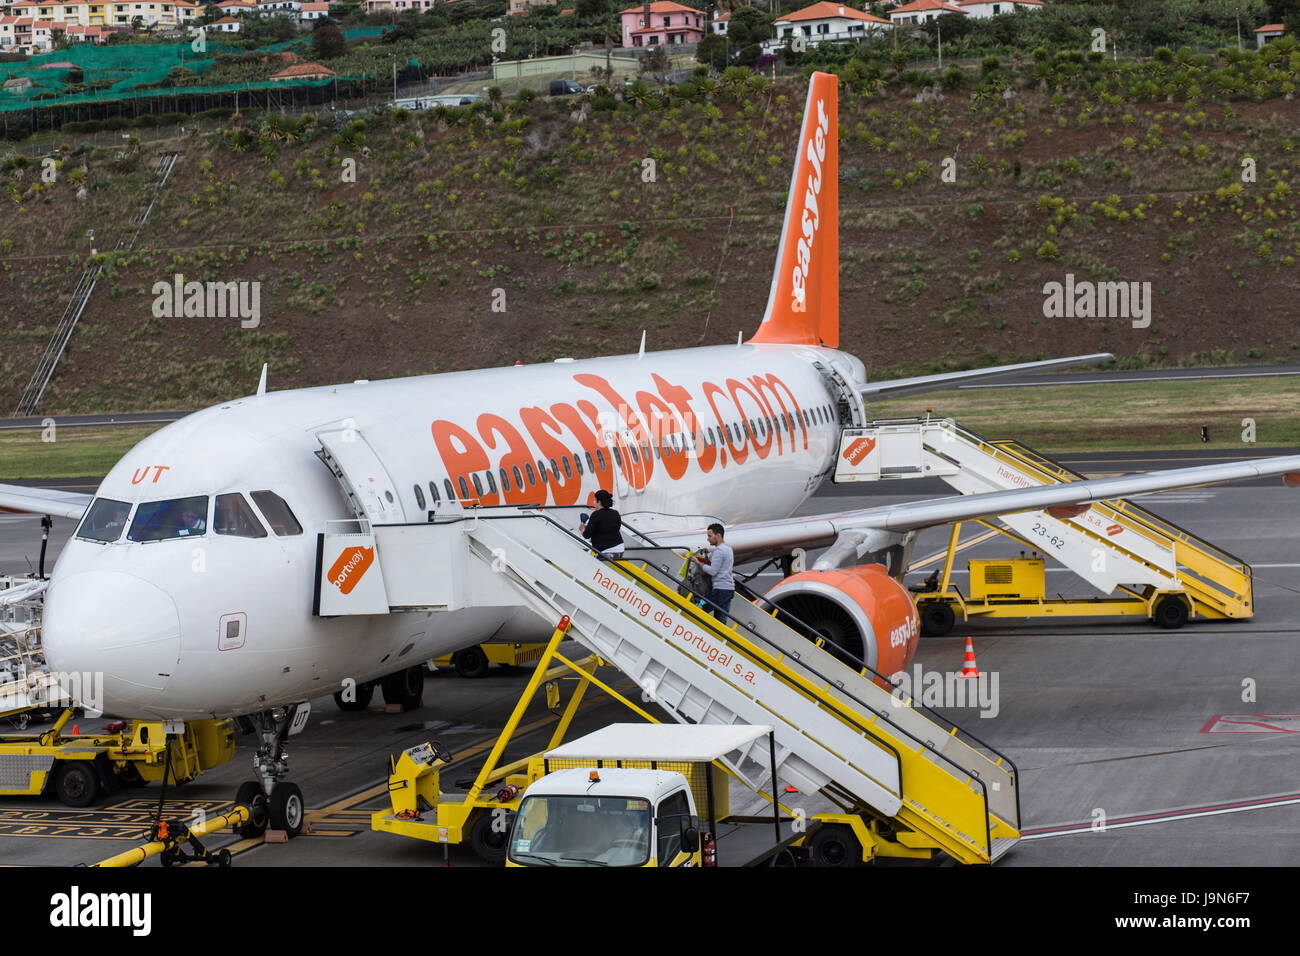 Airbus A319 - MSN 3118 at Madeira Airport, near Fuchal, recently renamed Christiano Ronaldo International Airport Stock Photo